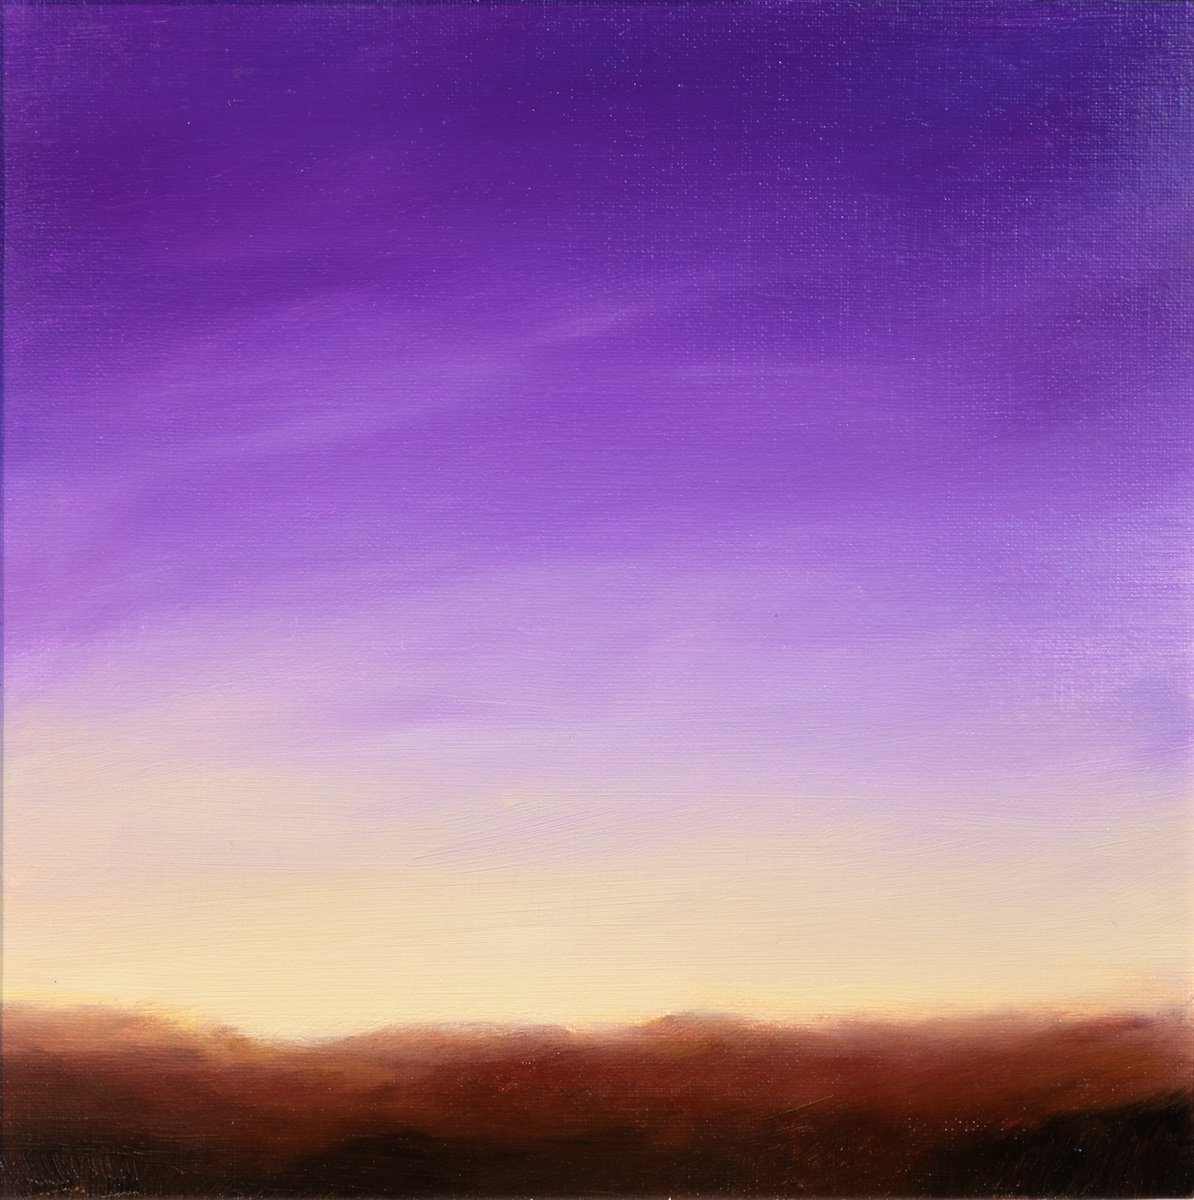 Dusk - landscape - Small size affordable art - Ideal decoration - Ready to frame by Fabienne Monestier